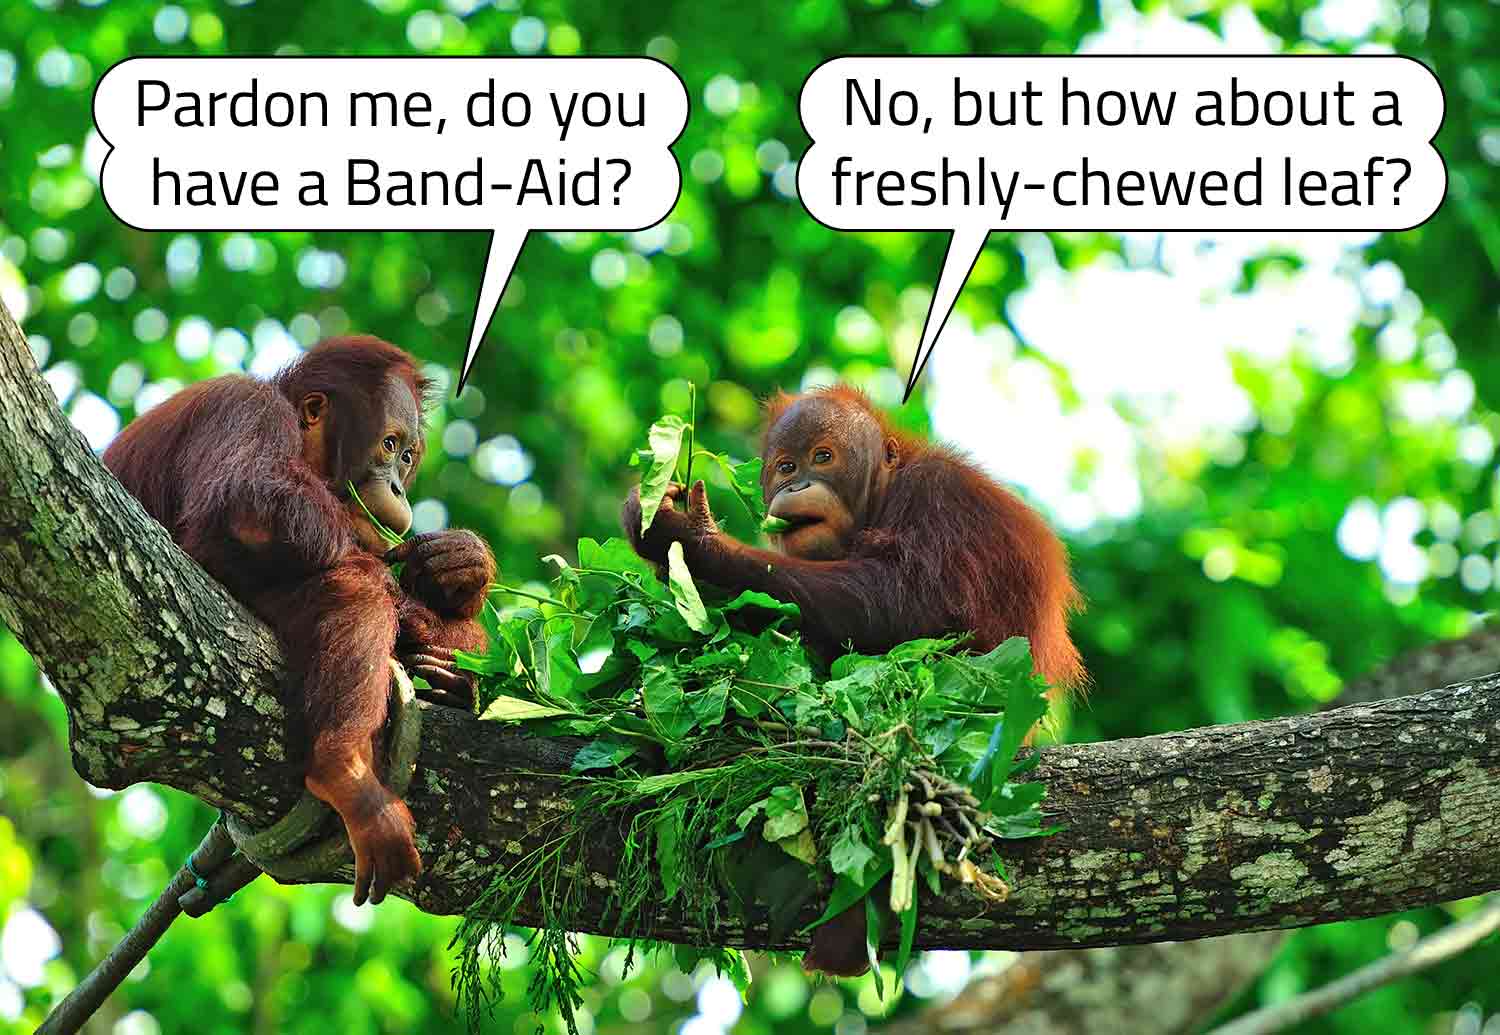 Two baby orangutans eat leaves. One asks for a band aid and the other one offers a leaf instead.